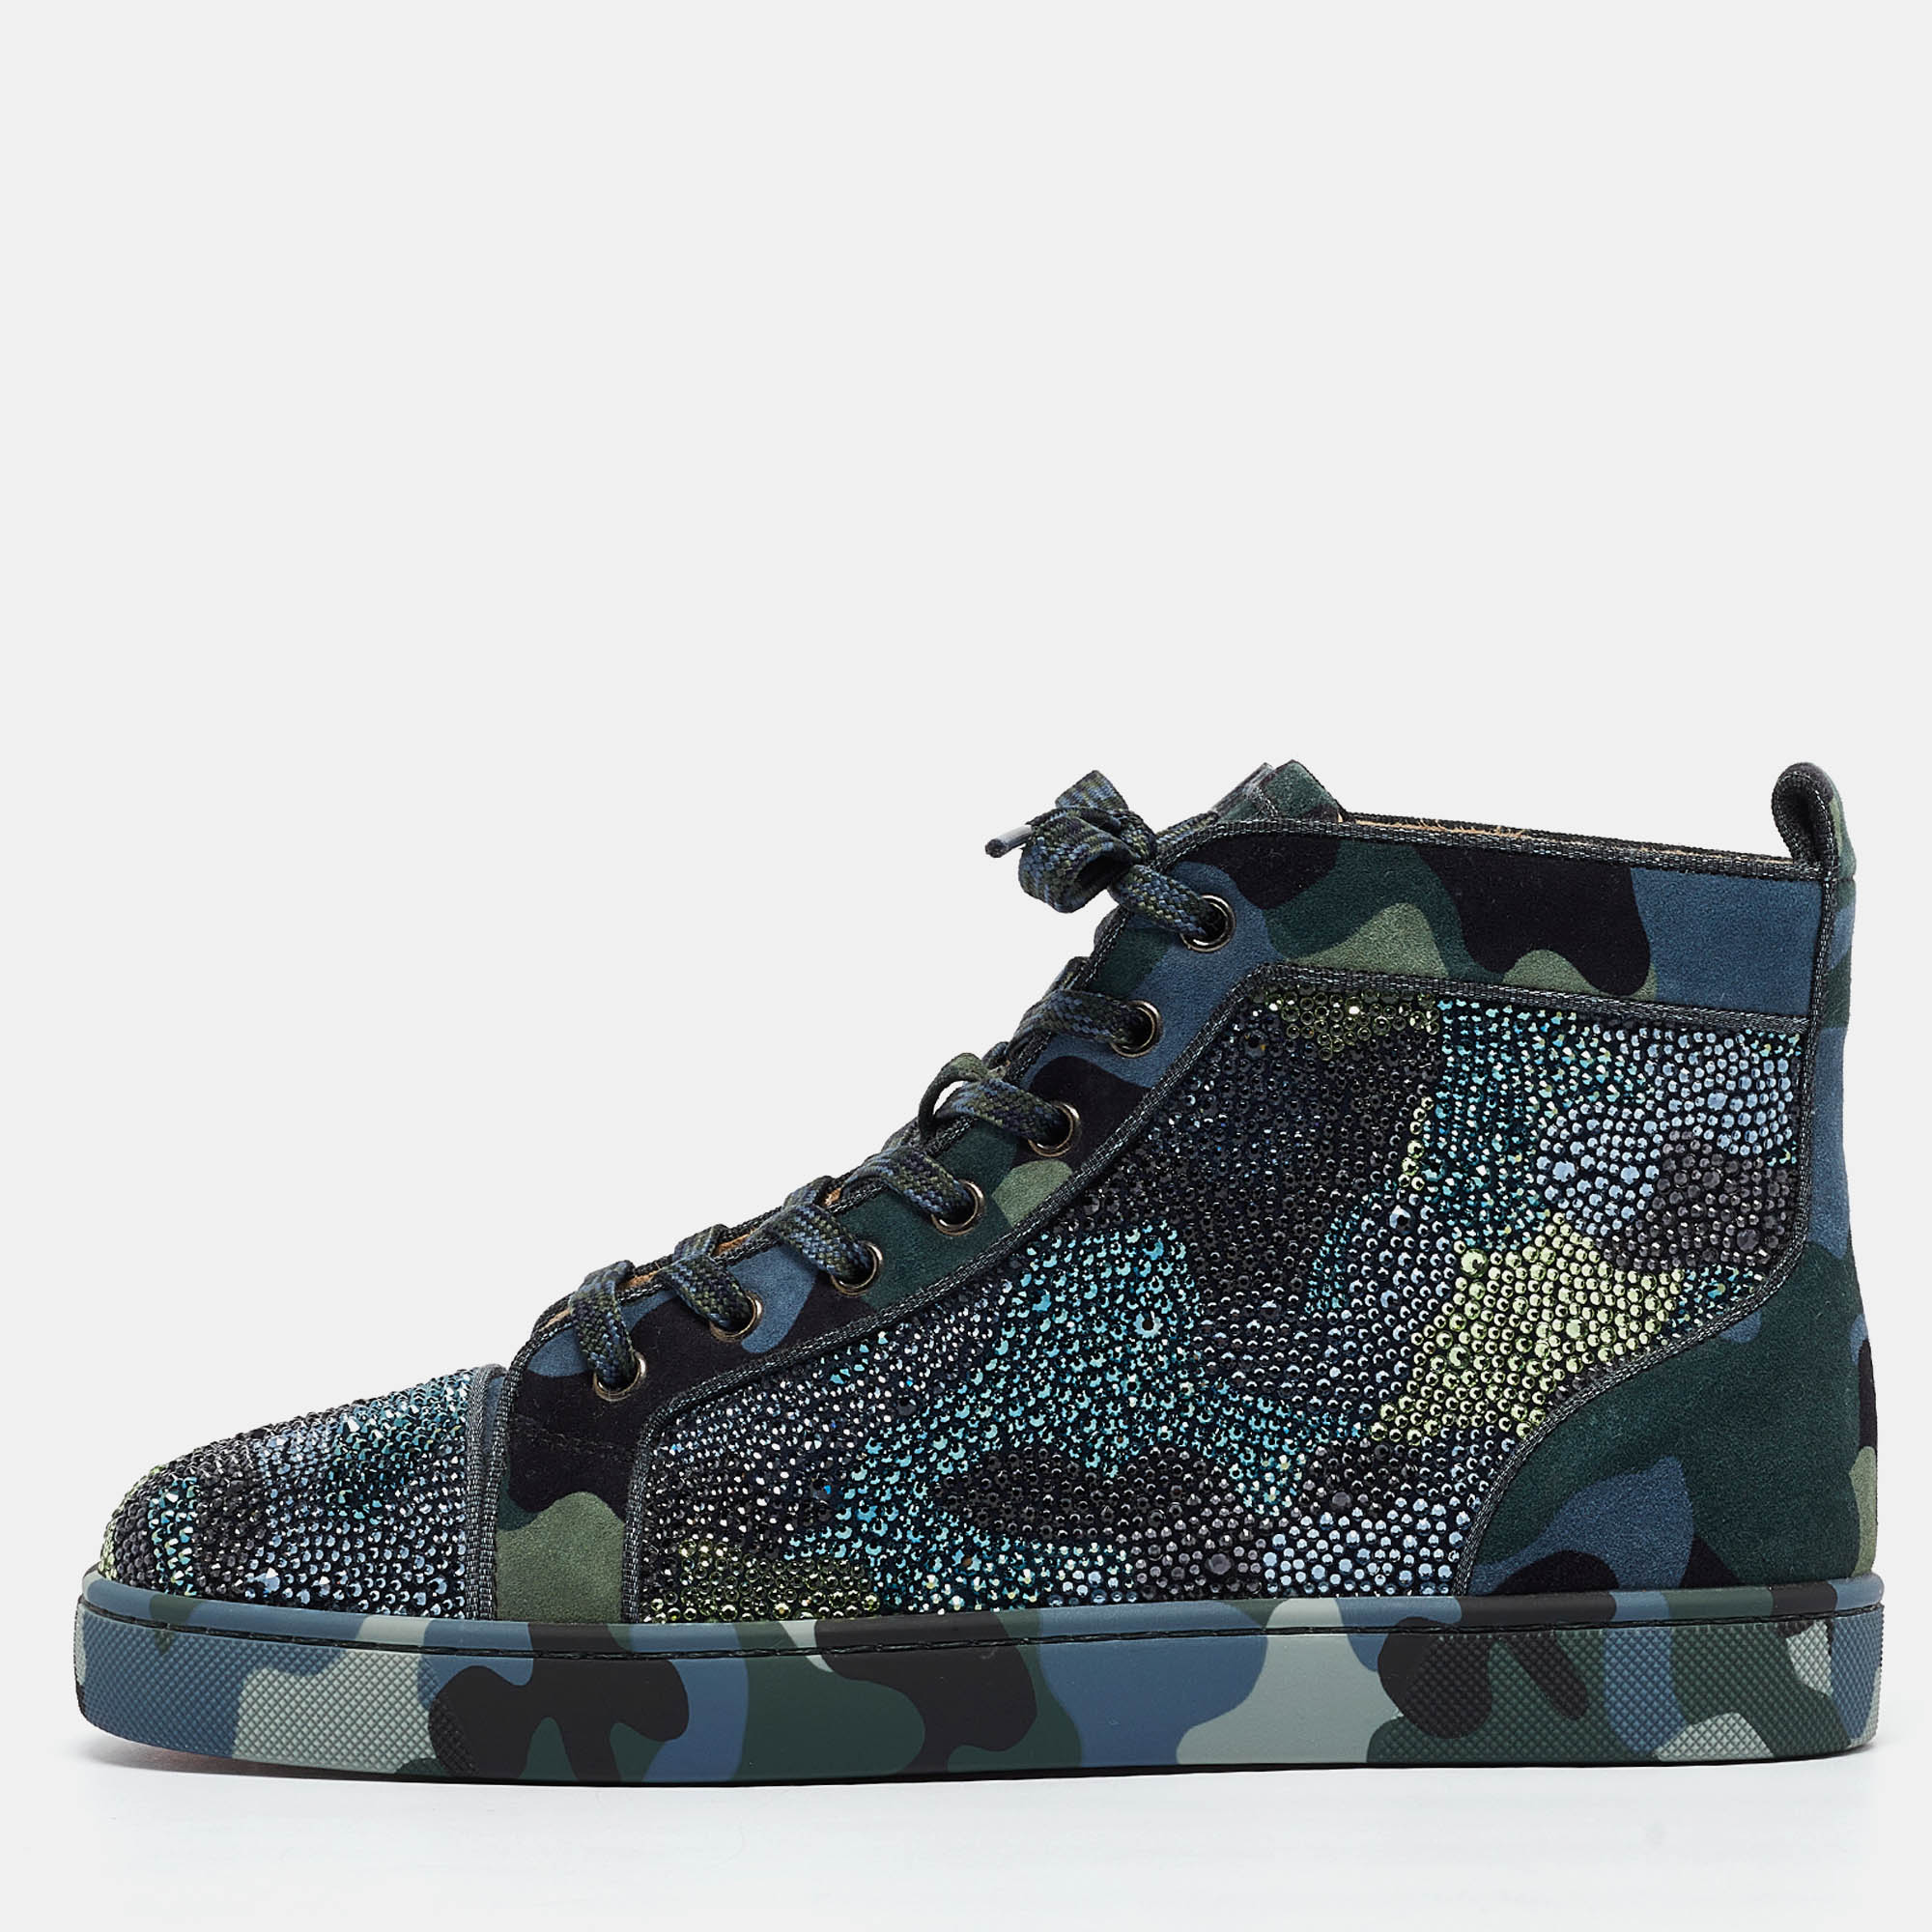 Christian louboutin blue/green camouflage suede embellished louis orlato sneakers size 42